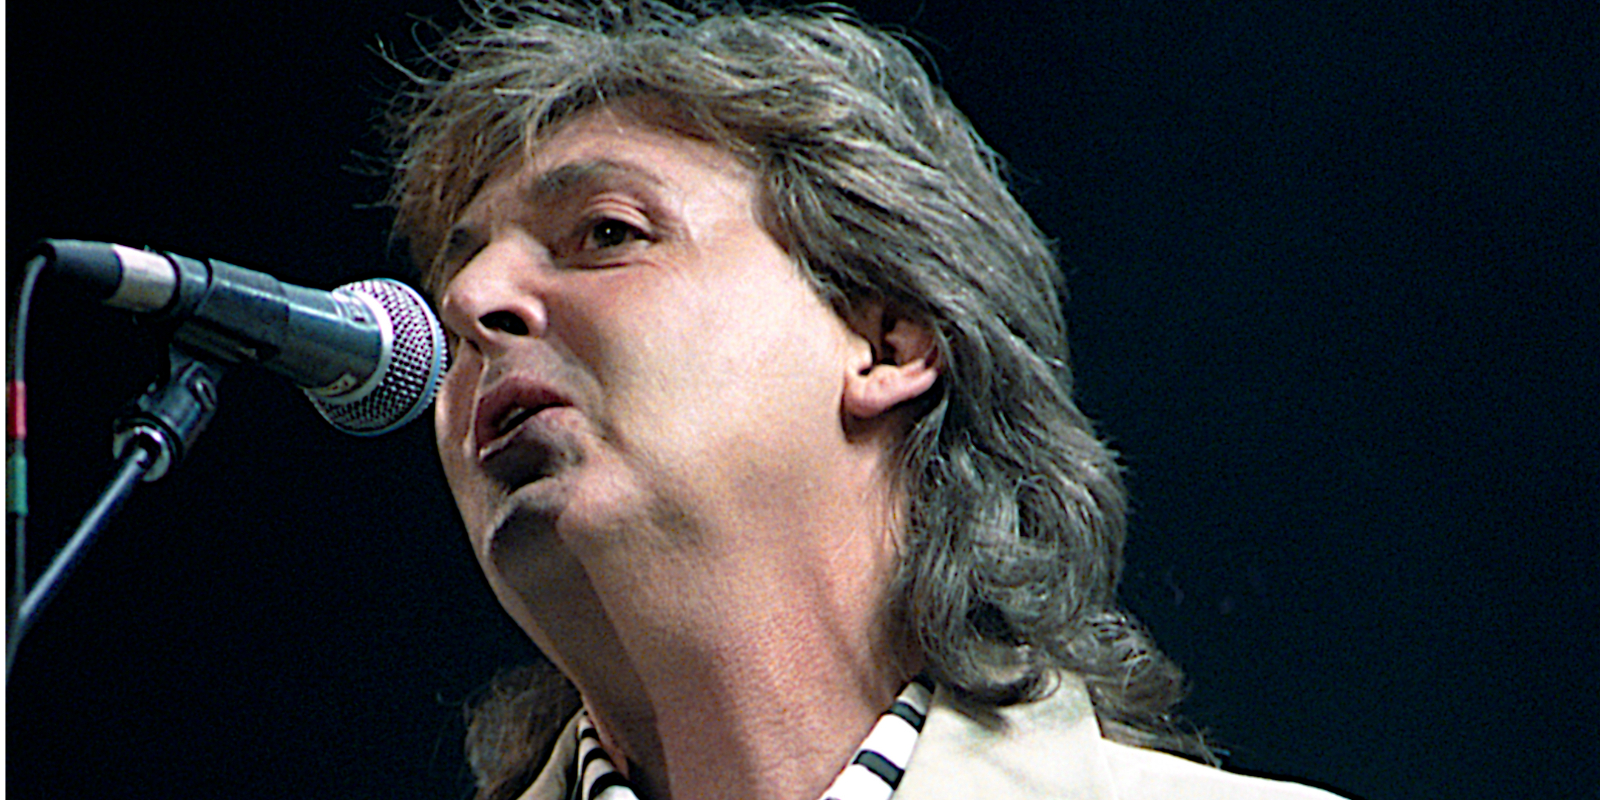 Paul McCartney in concert for the Fourth of July, 1990, the tour coincided with the release of his Flowers in the Dirt album.